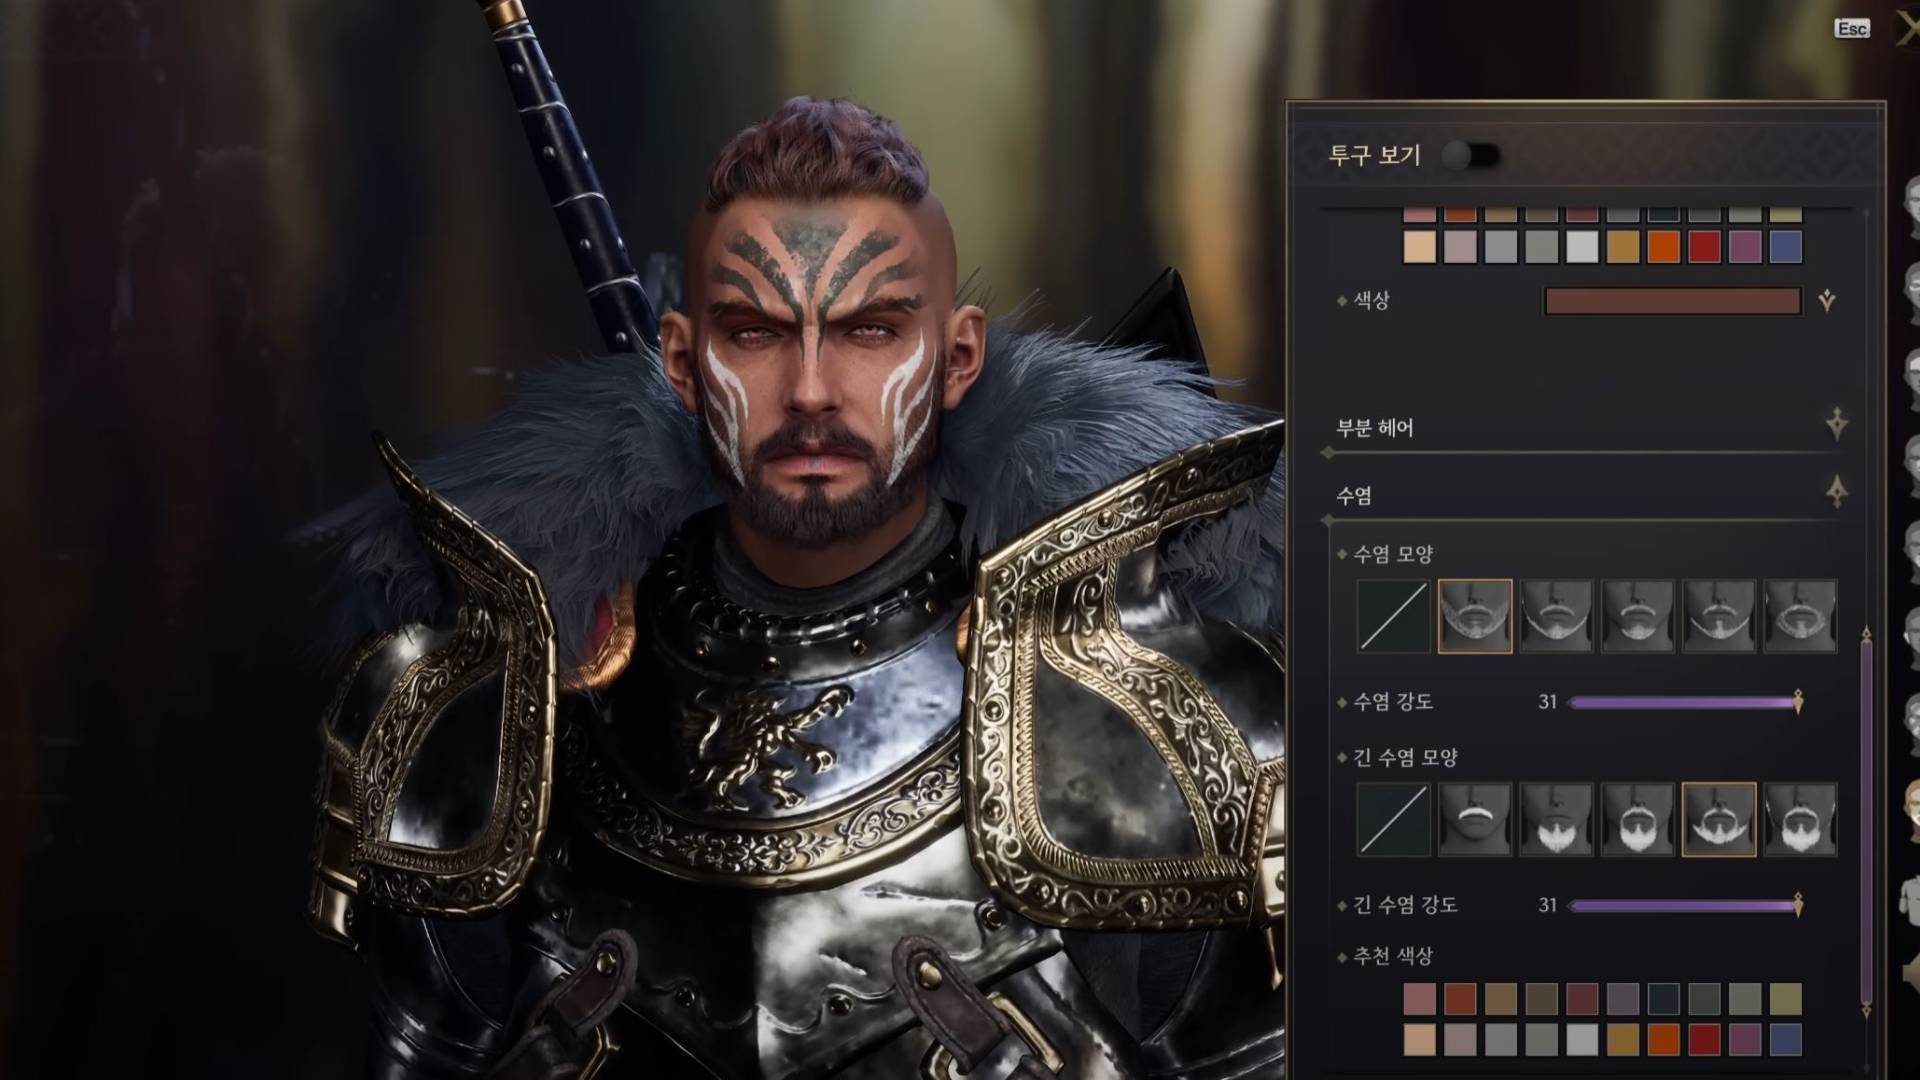 In-game character designer preset of [Throne and Liberty] KR CBT :  r/throneandliberty